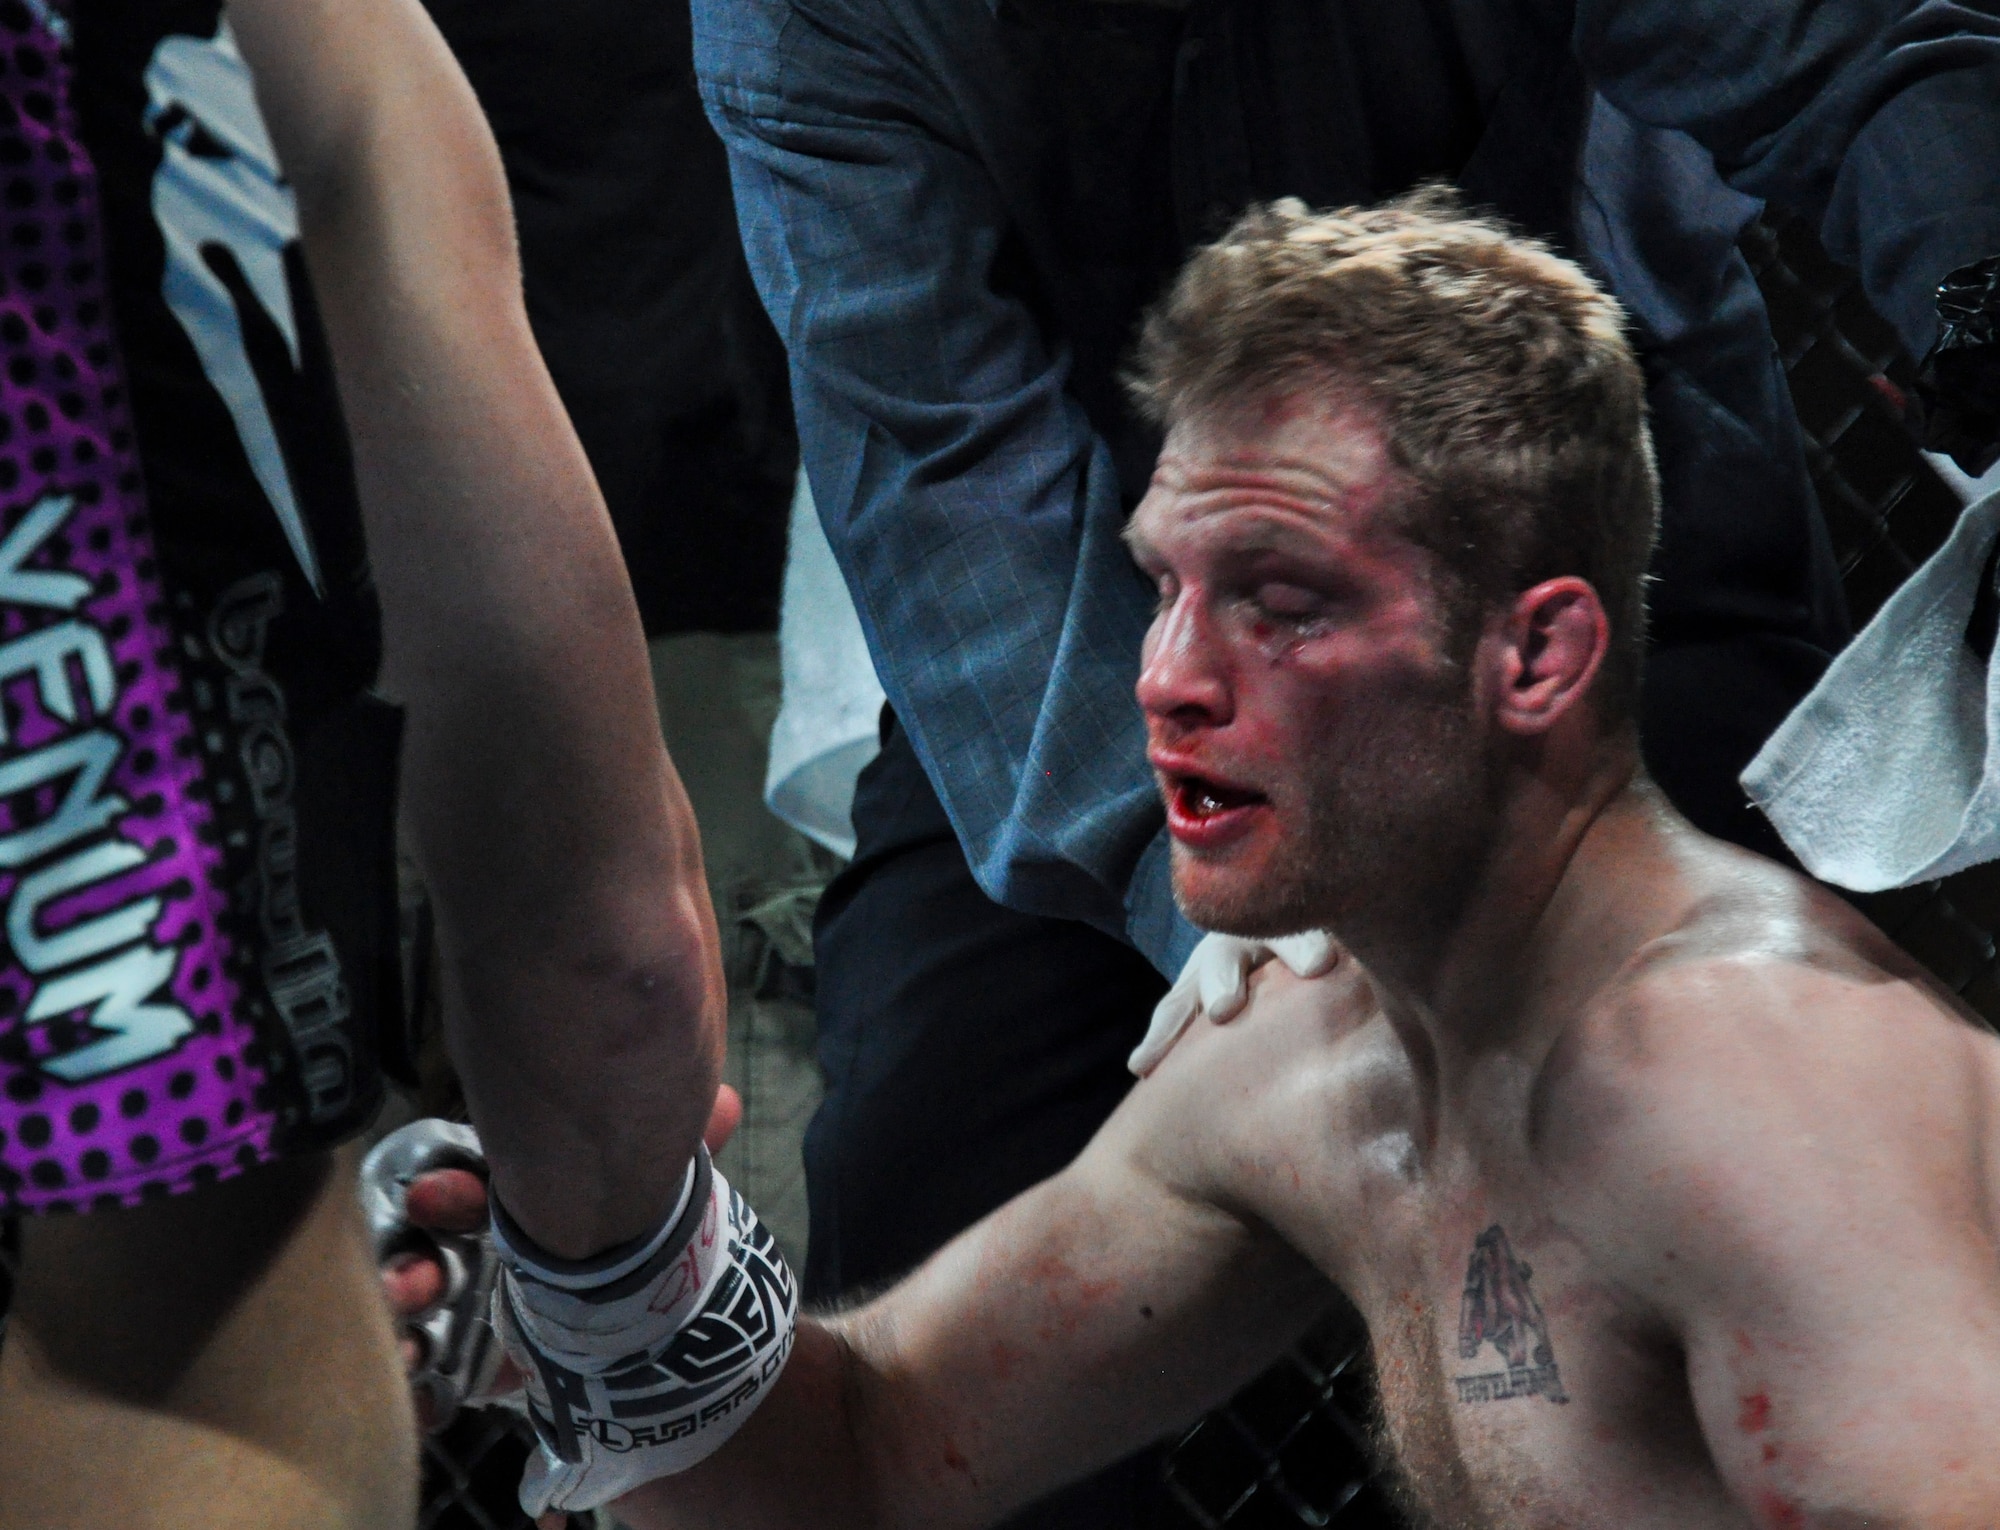 A bloodied Reed O’Malley congratulates his opponent Todd “Captain America” Meredith after a brutal battle Feb. 9, 2013, at Buckley MMA Fight Night. Meredith won by technical knockout in the first round after delivering bone-crushing blows to O’Malley’s face from the mount position. (U.S Air Force photo by Staff Sgt. Nicholas Rau/Released)   